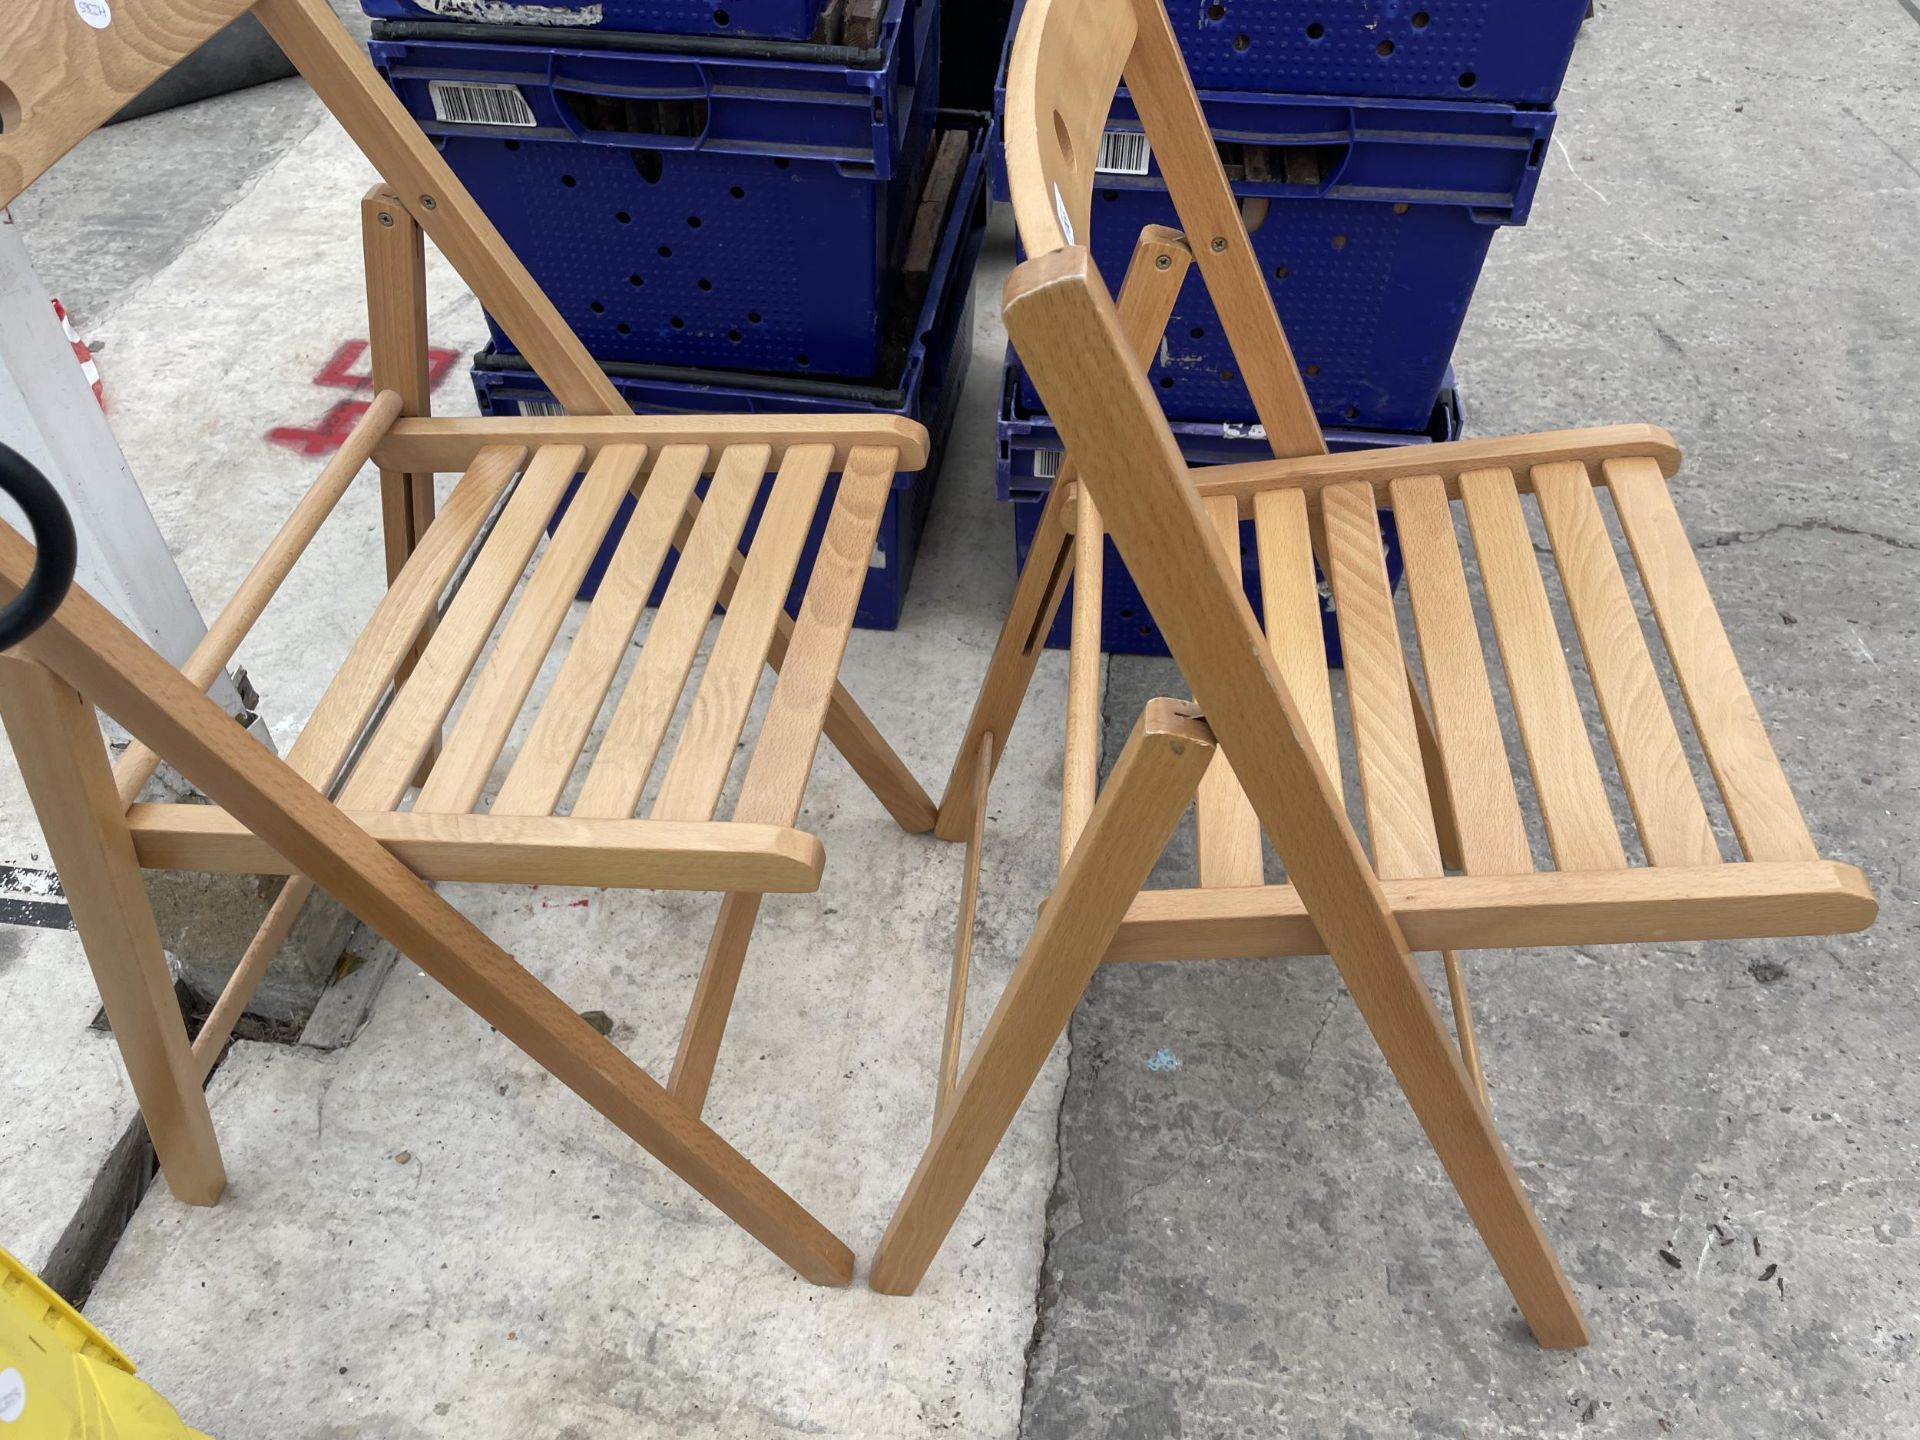 A PAIR OF FOLDING WOODEN CHAIRS - Image 2 of 2